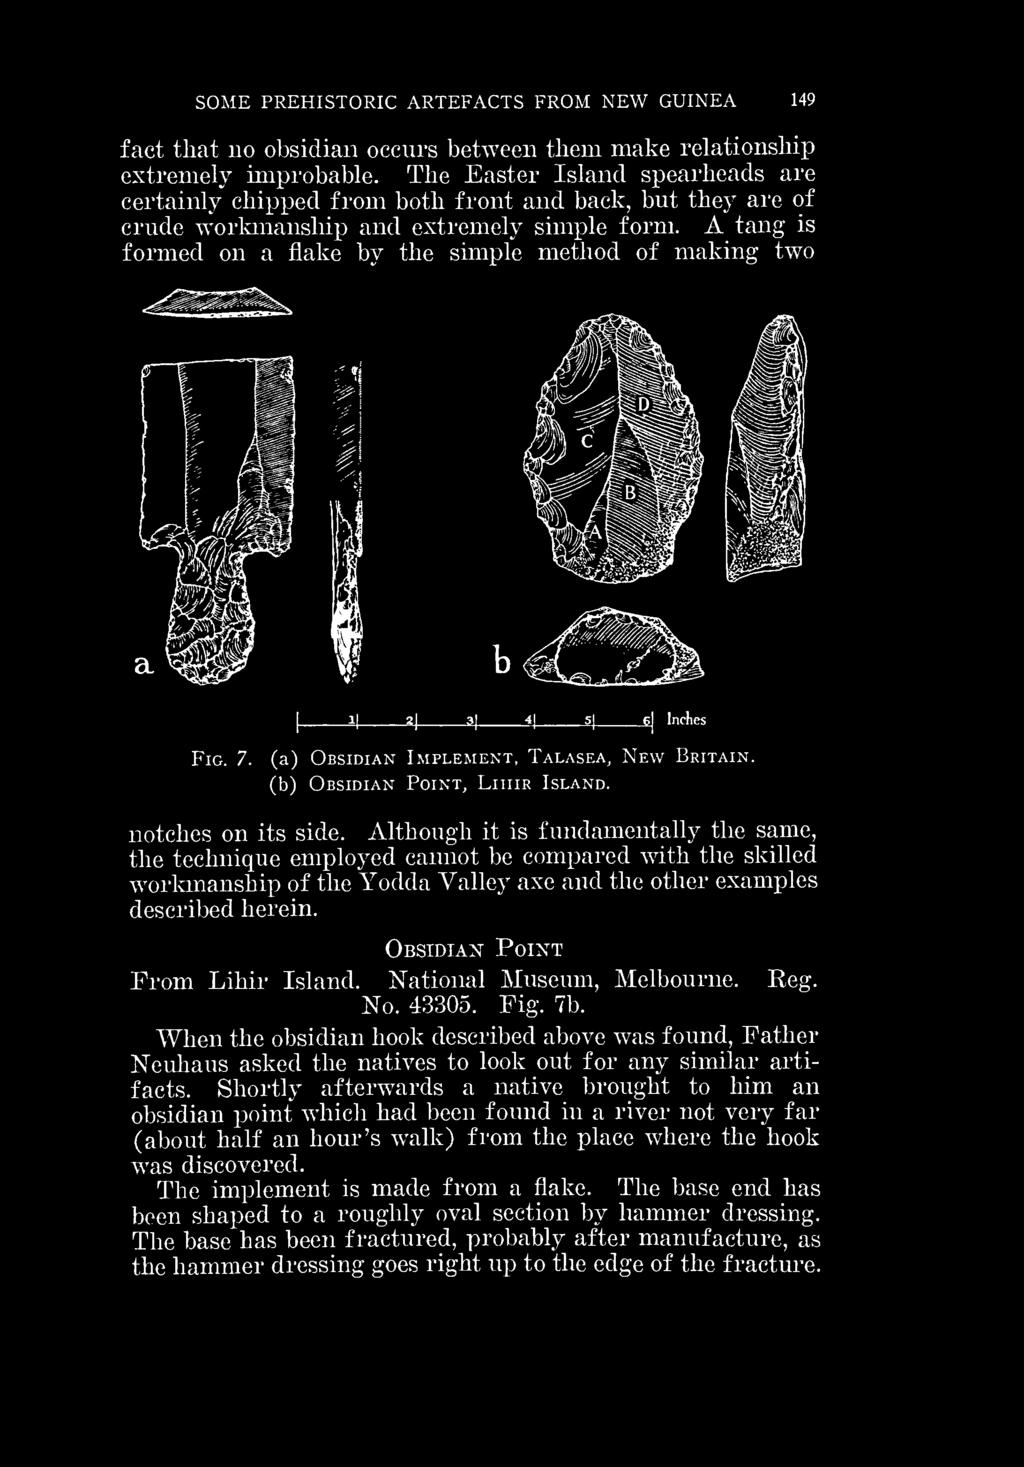 Obsidian Point From Lihir Island. National Museum, Melbourne. Peg. No. 43305. Fig. 7b. Wlien the obsidian hook described above was found.